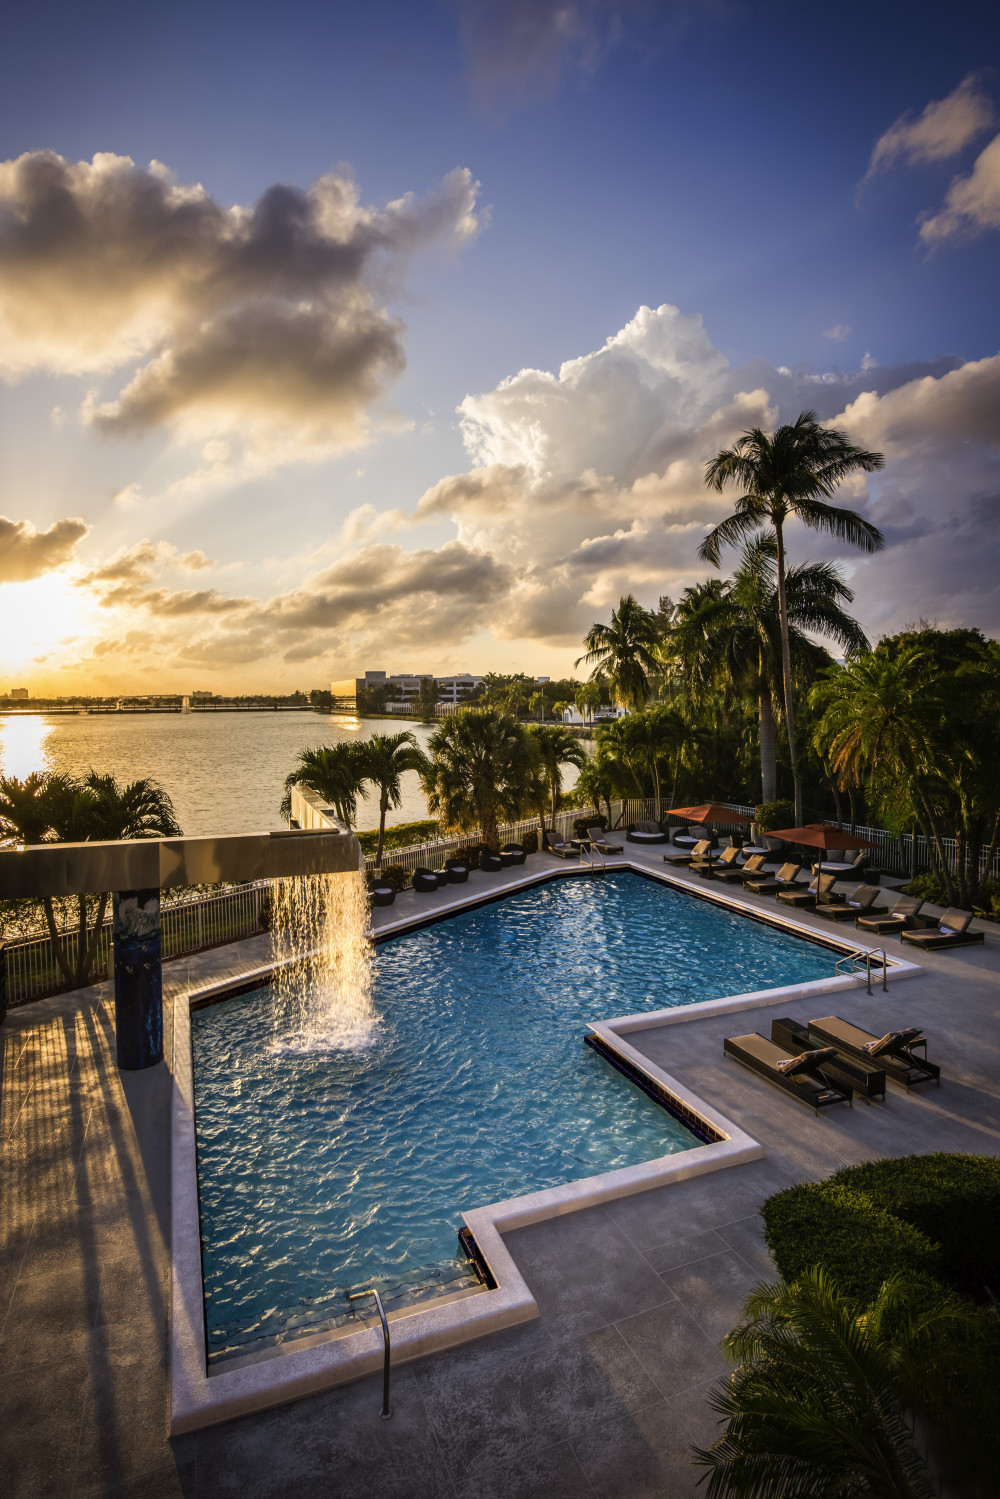 Our sparkling pool offers breathtaking views of the Blue Lagoon Miami and the city skyline